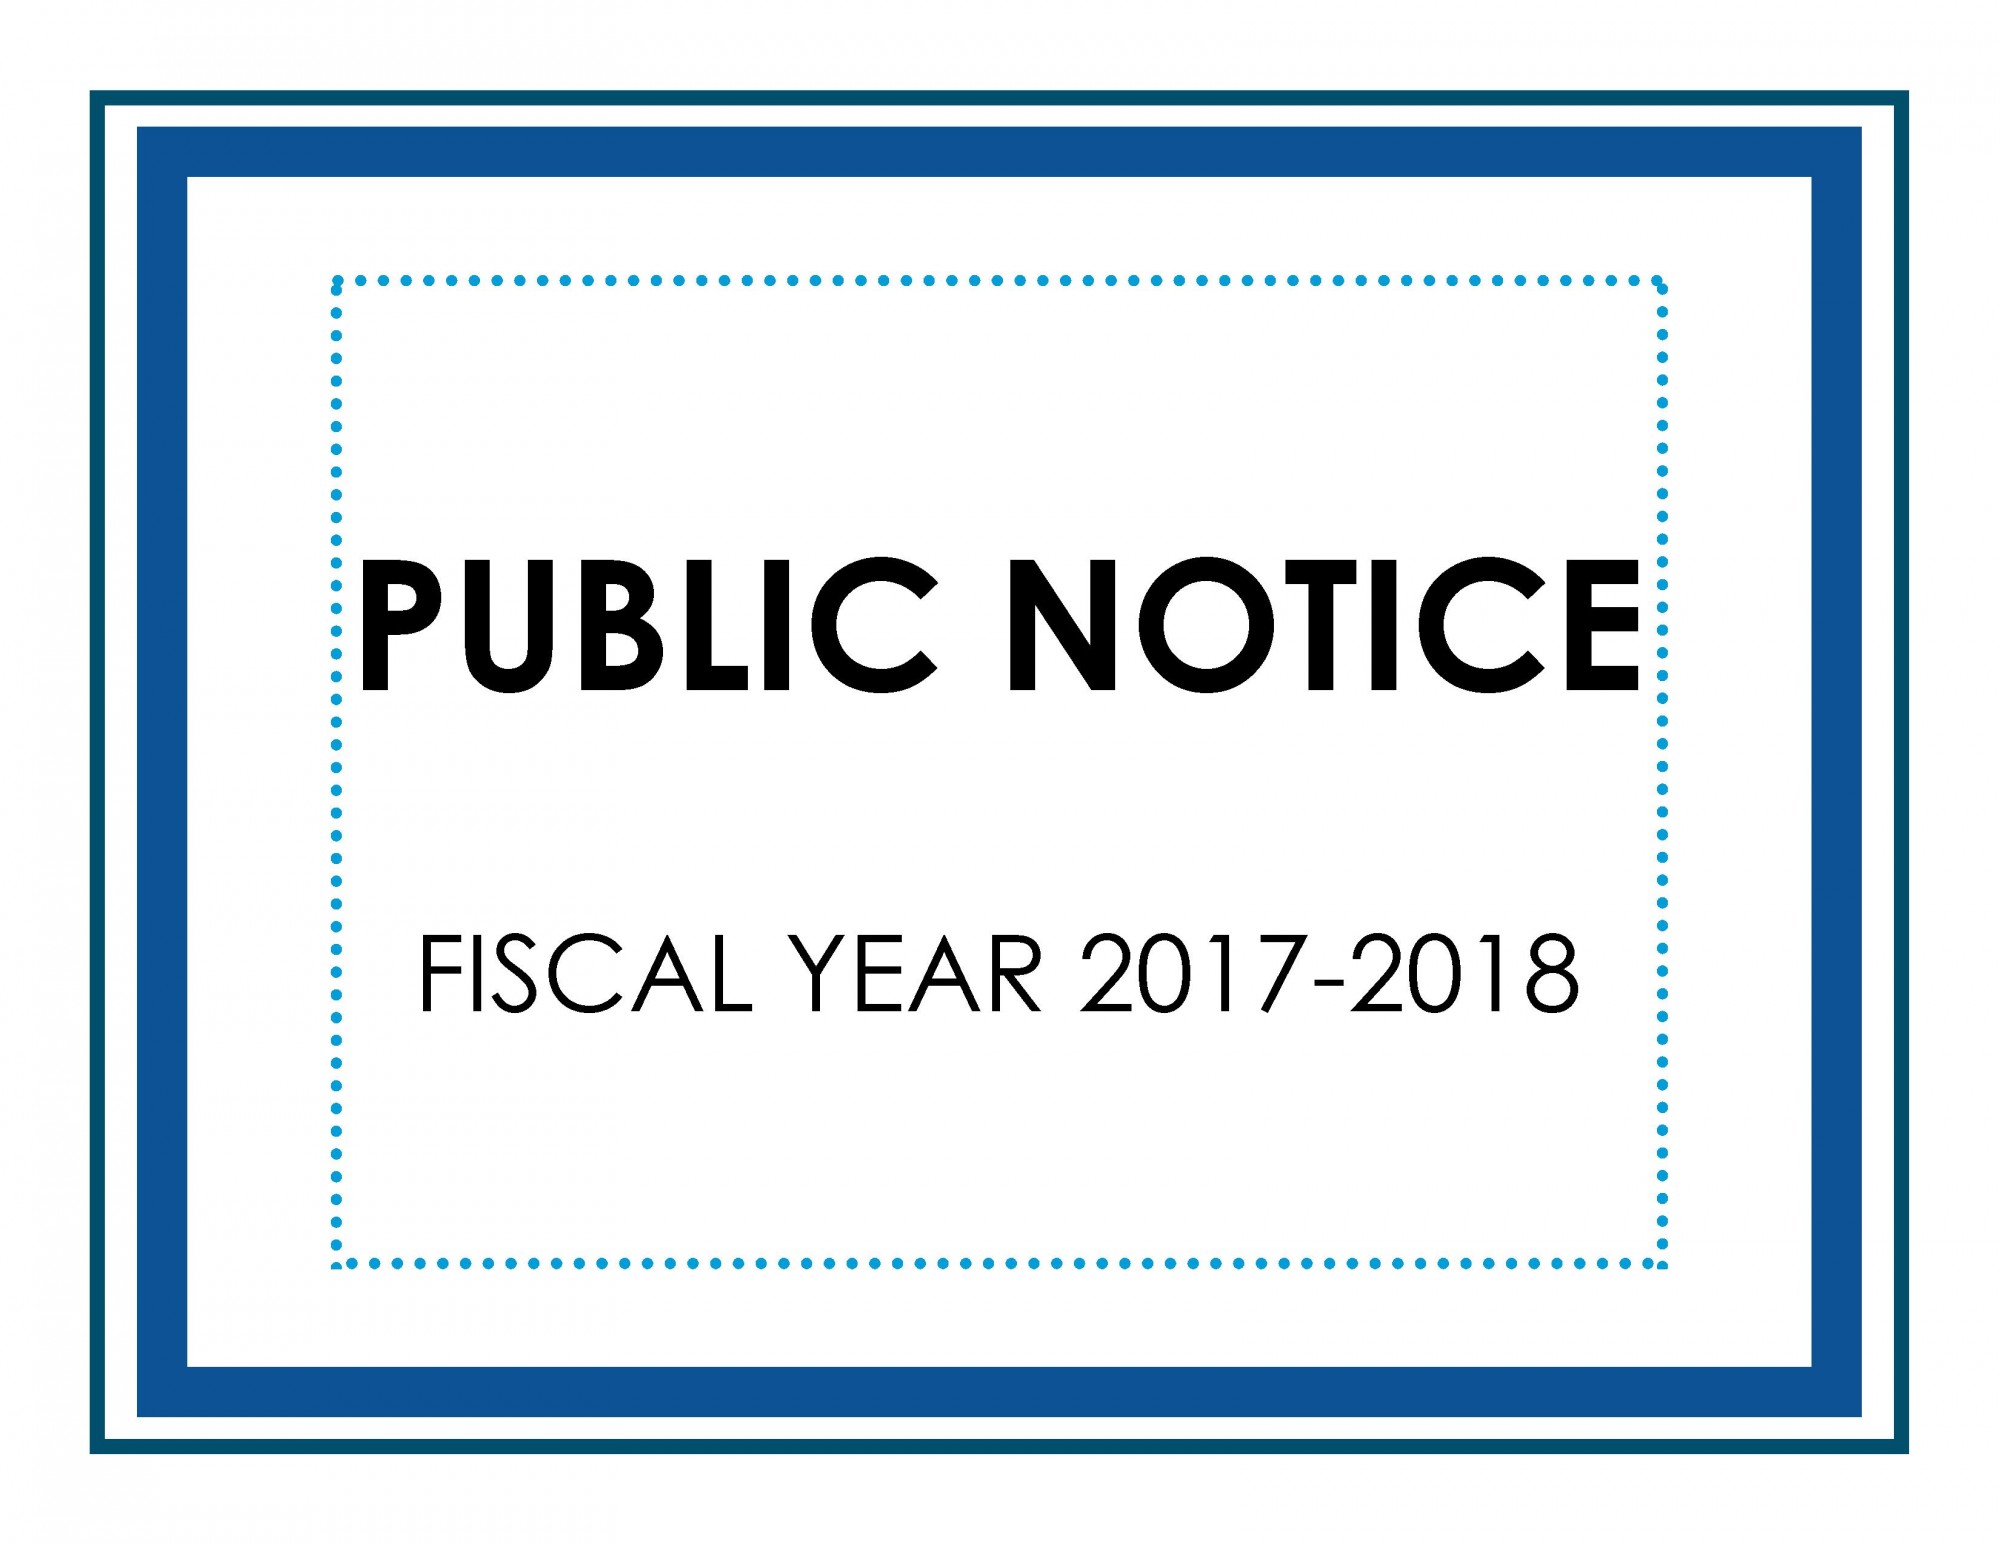 Public Notice - Proposed Budget and Rates